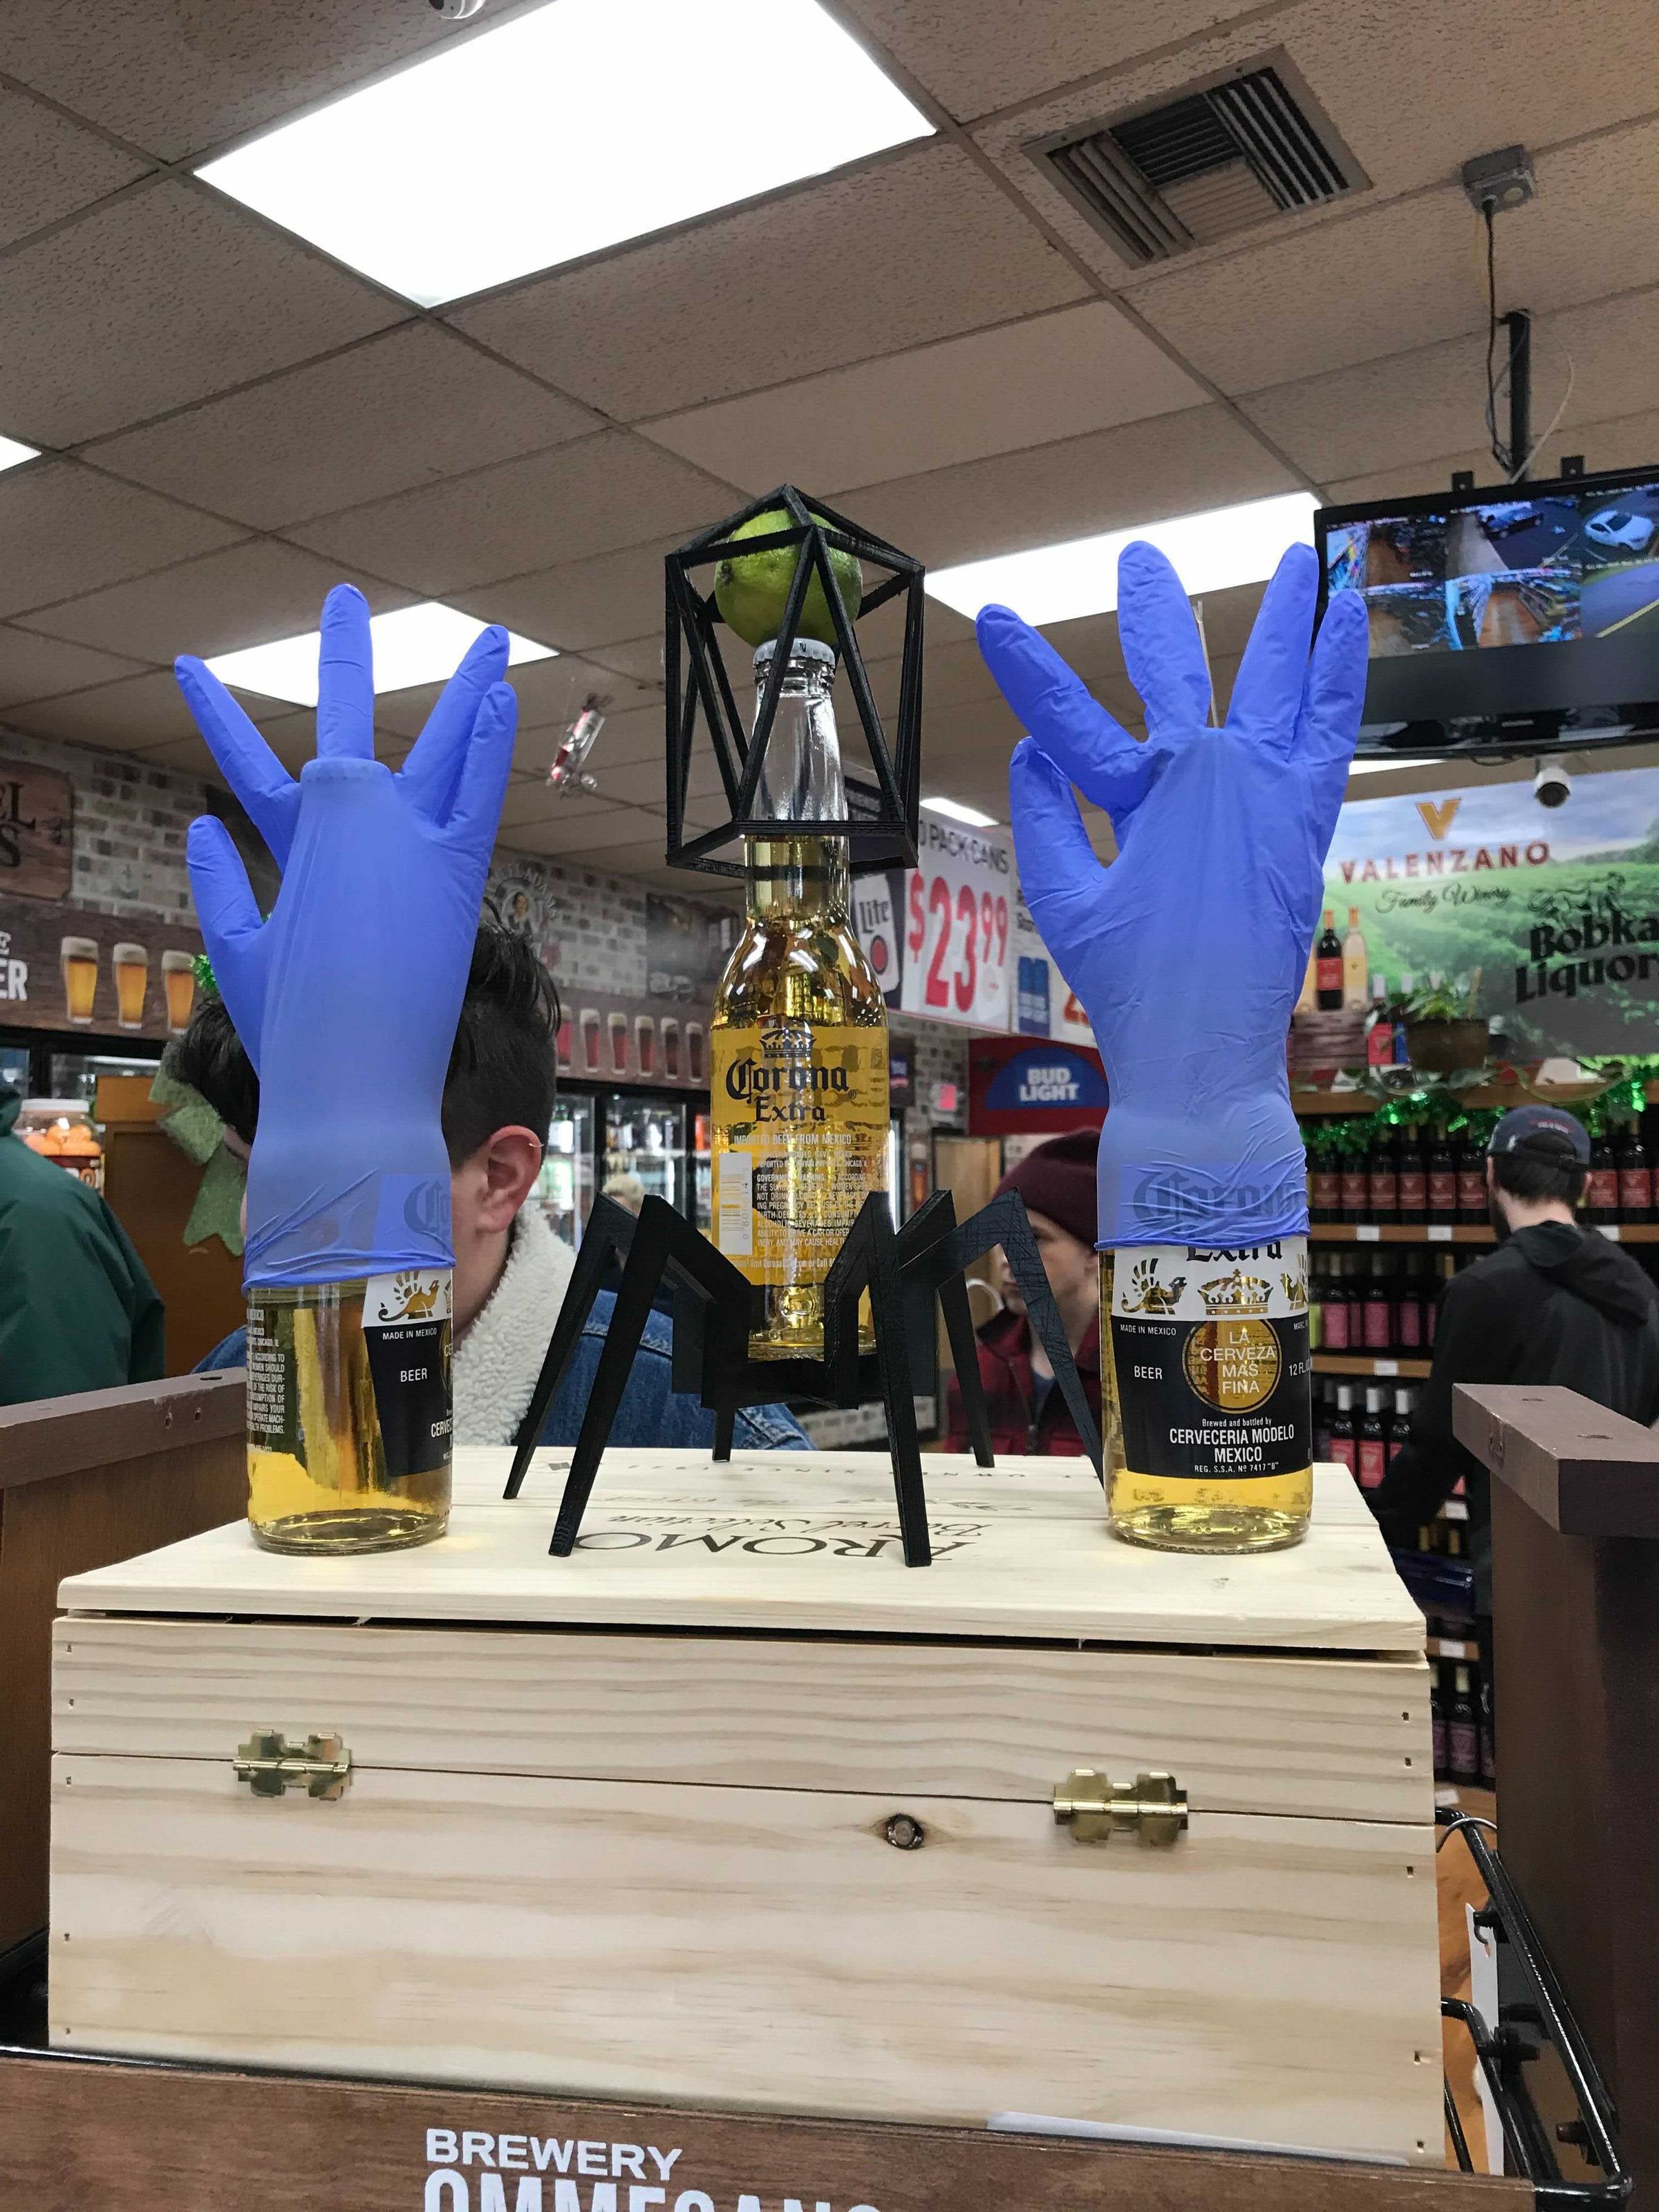 A liquor store display in Deptford, New Jersey.